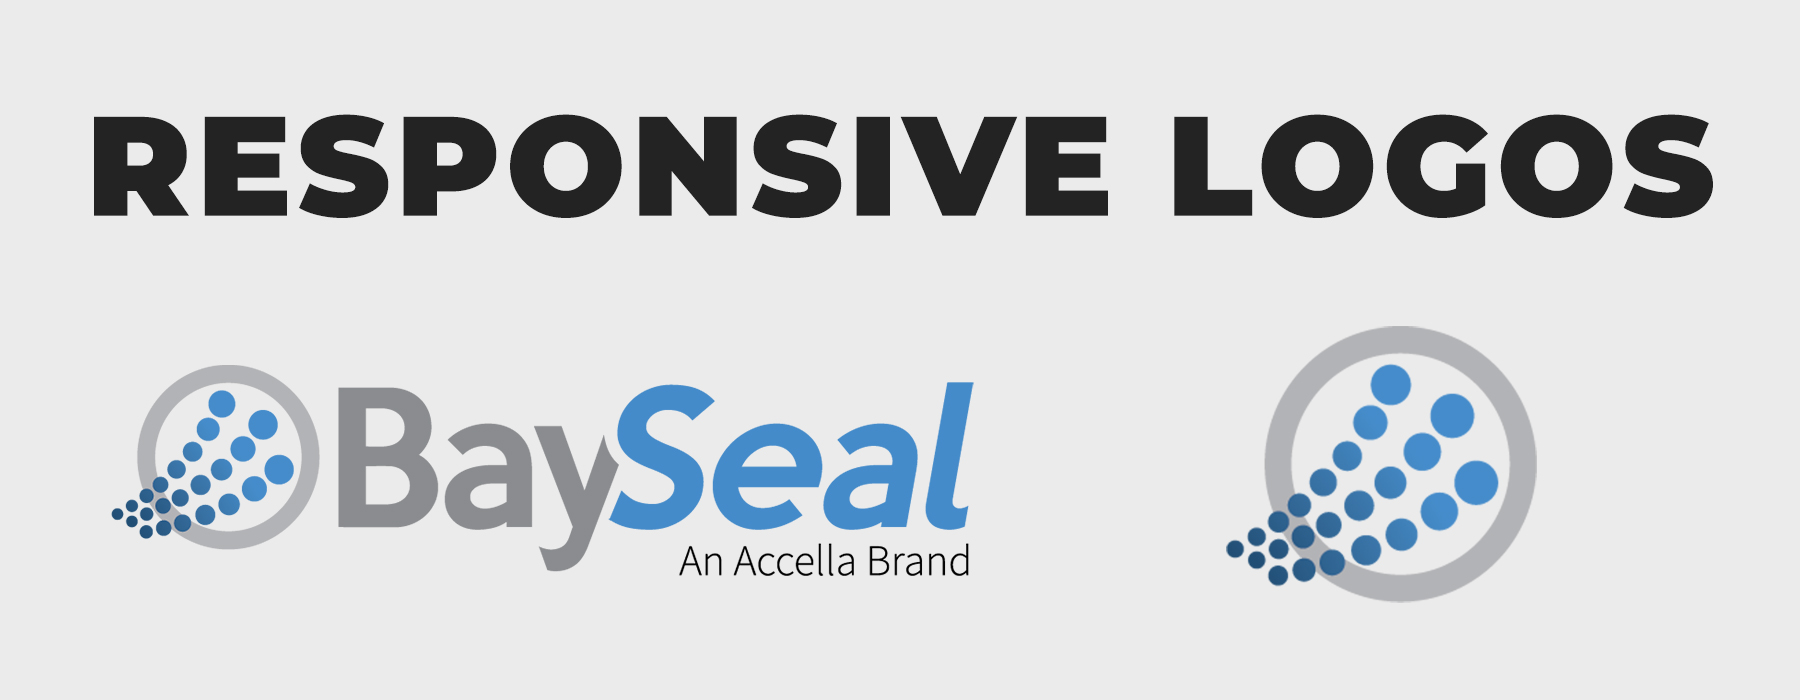 Bay Seal's web design now features responsive logos that perfectly represent their brand and branding.